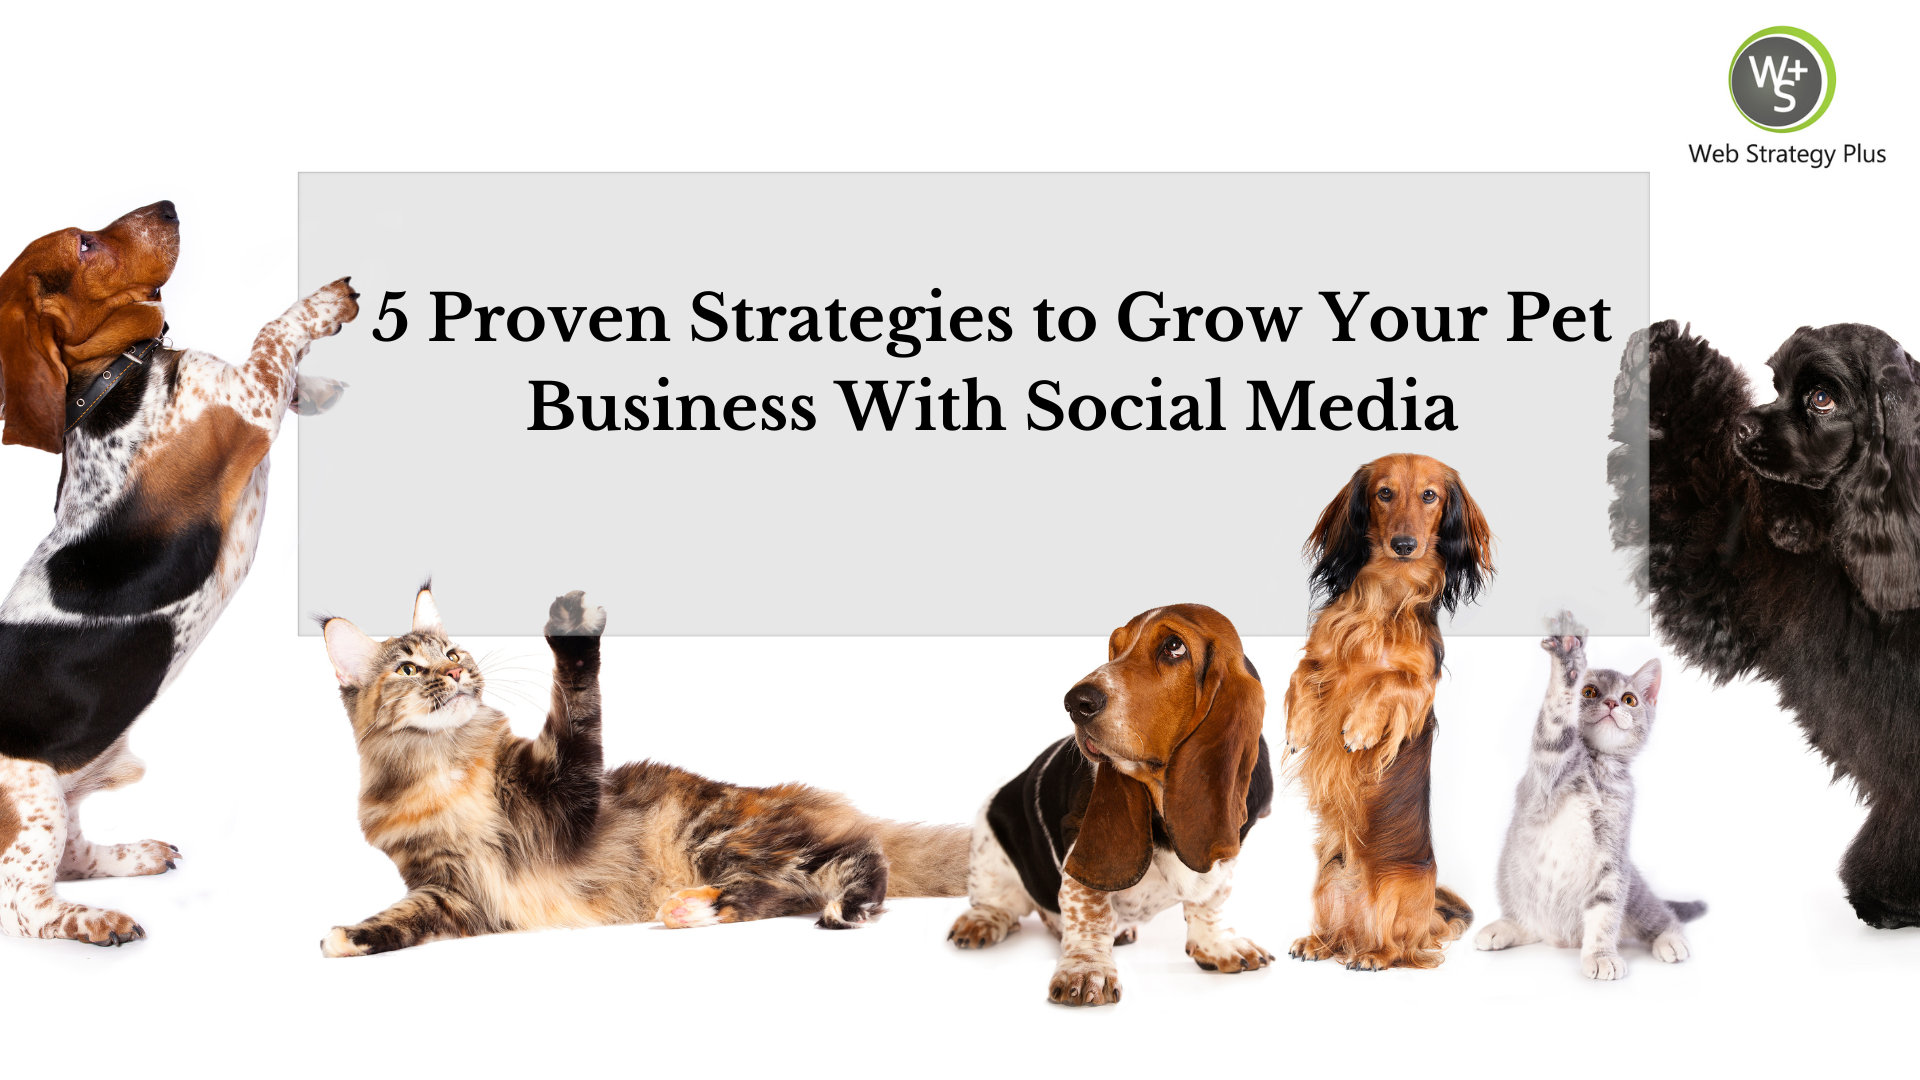 5 Ways to Grow Your Pet Business With Social Media